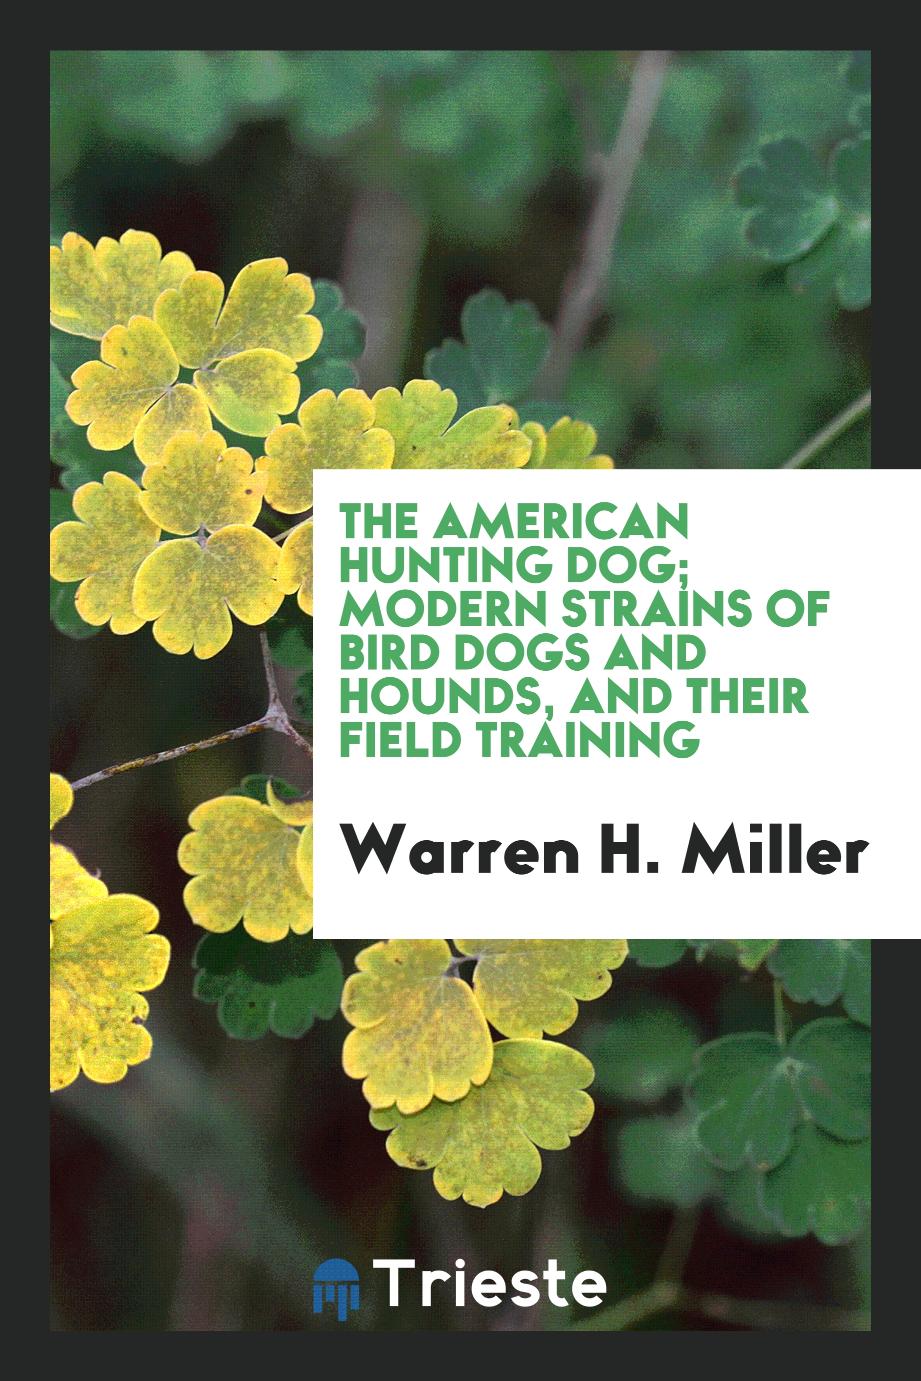 The American hunting dog; modern strains of bird dogs and hounds, and their field training